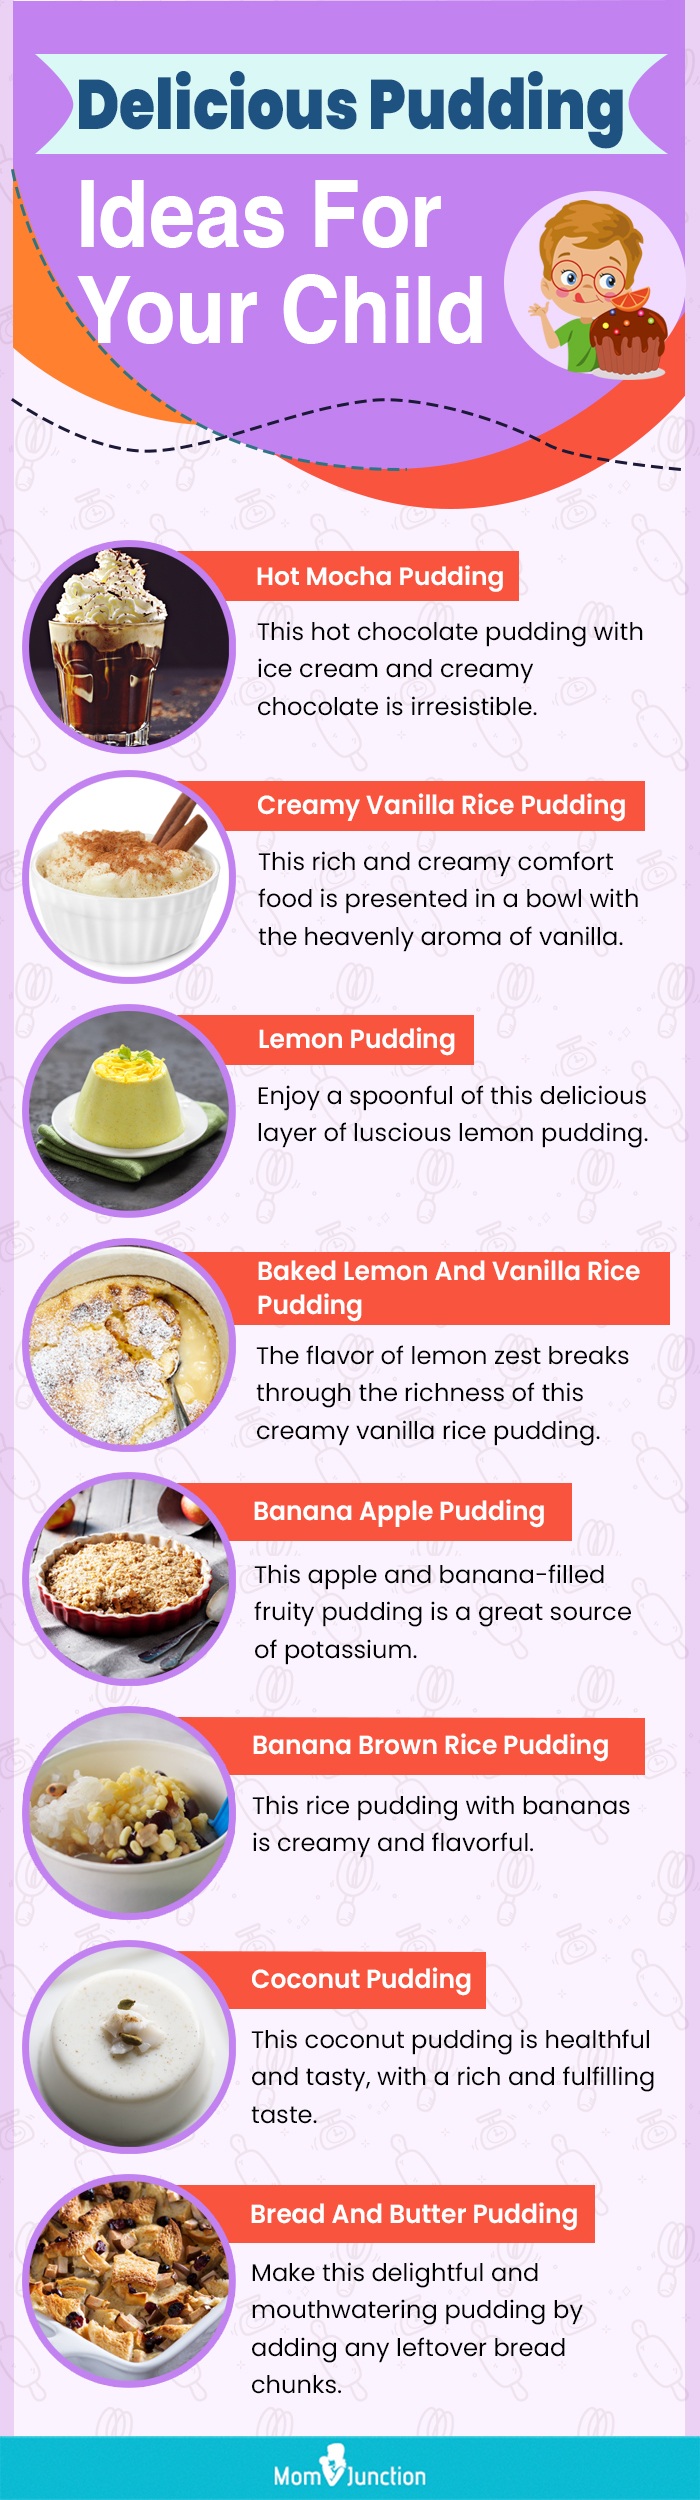 delicious pudding ideas for your child (infographic)